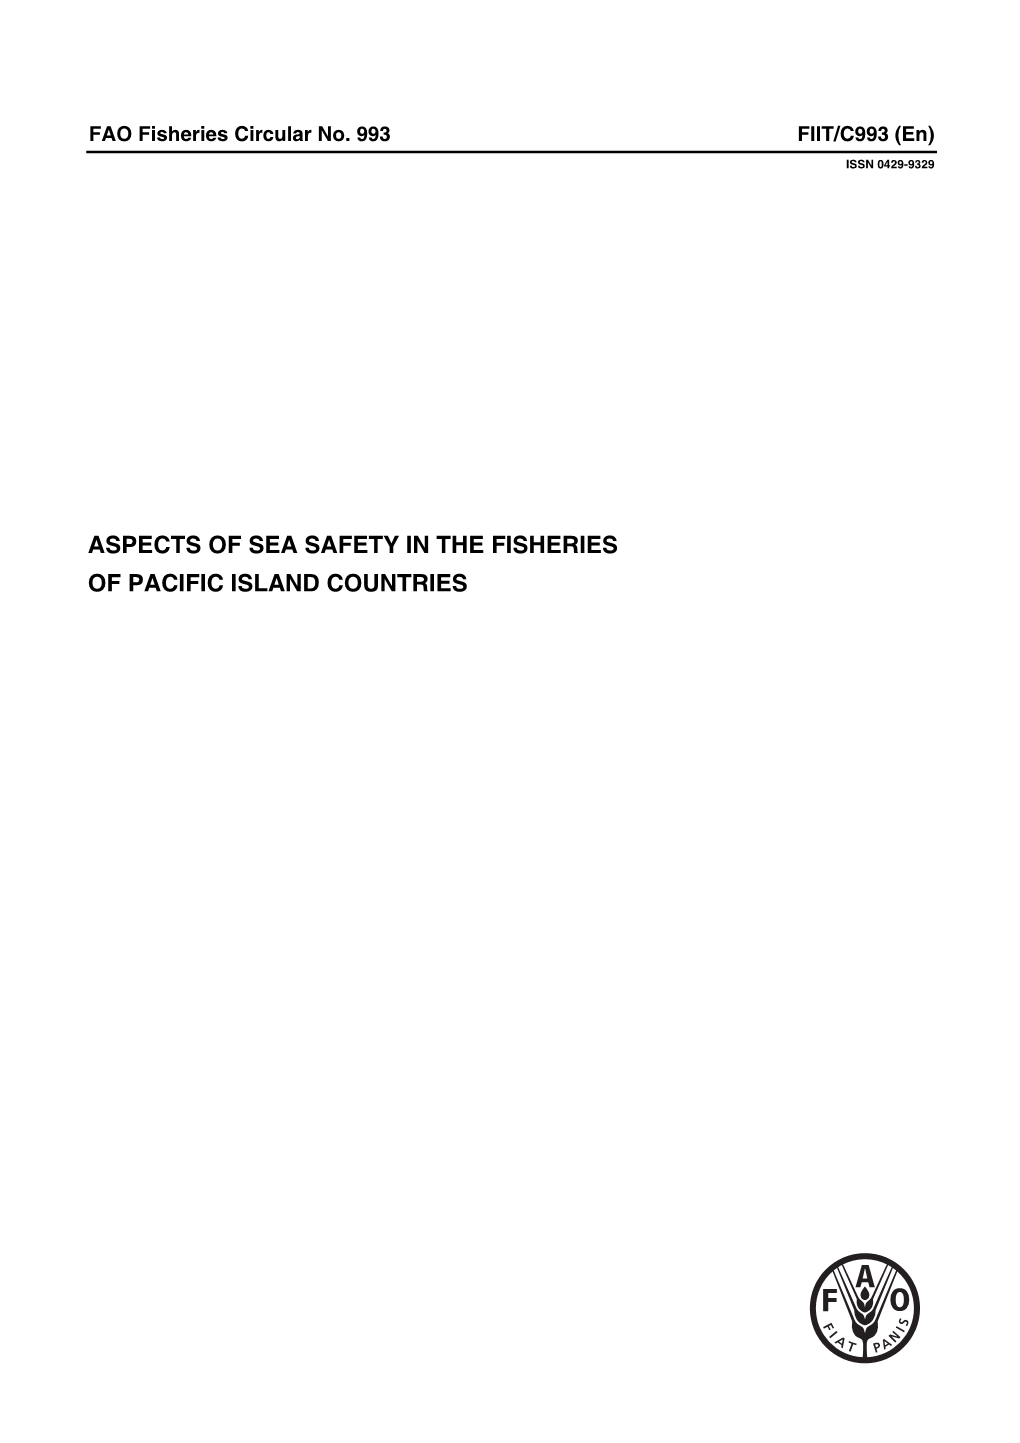 Aspects of Sea Safety in the Fisheries of Pacific Island